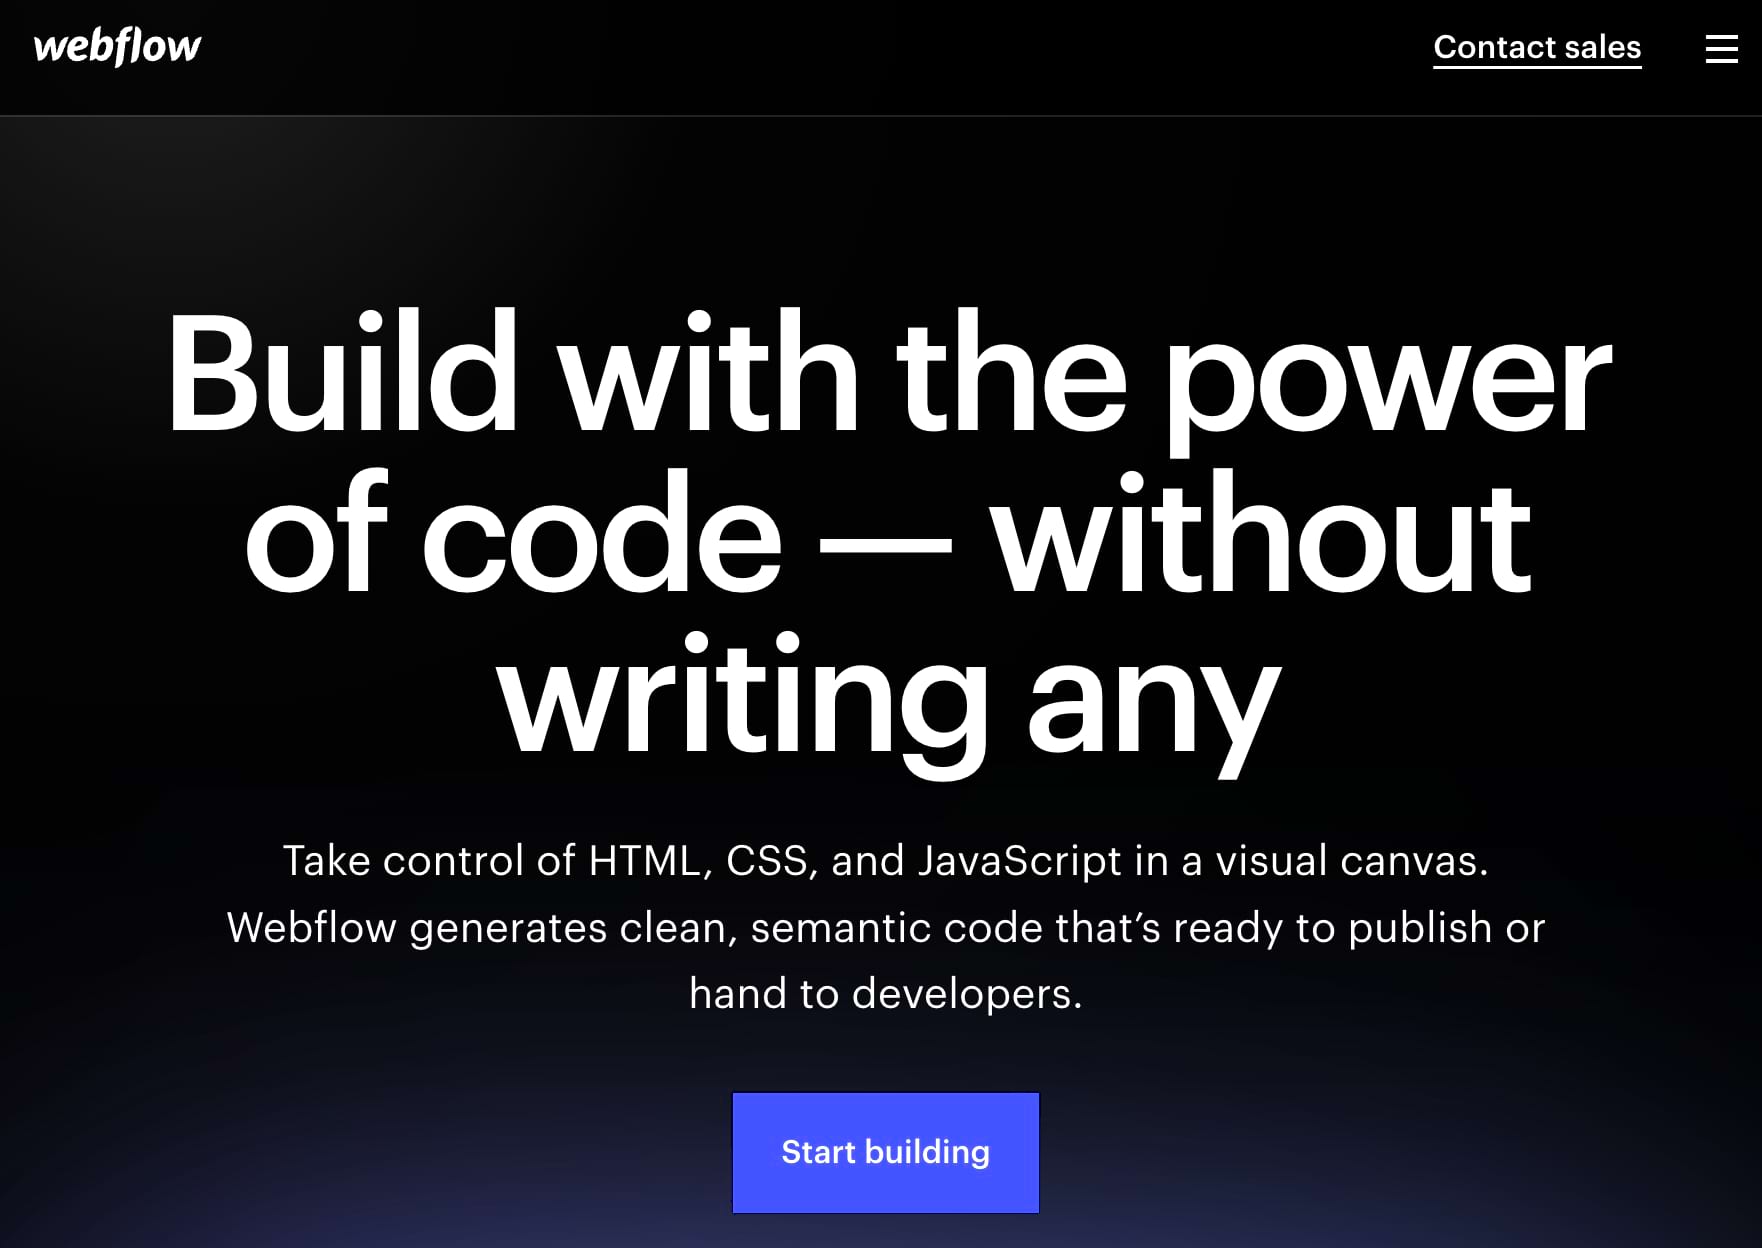 Webflow's landing page with tagline "Build with the power of code - without writing any"